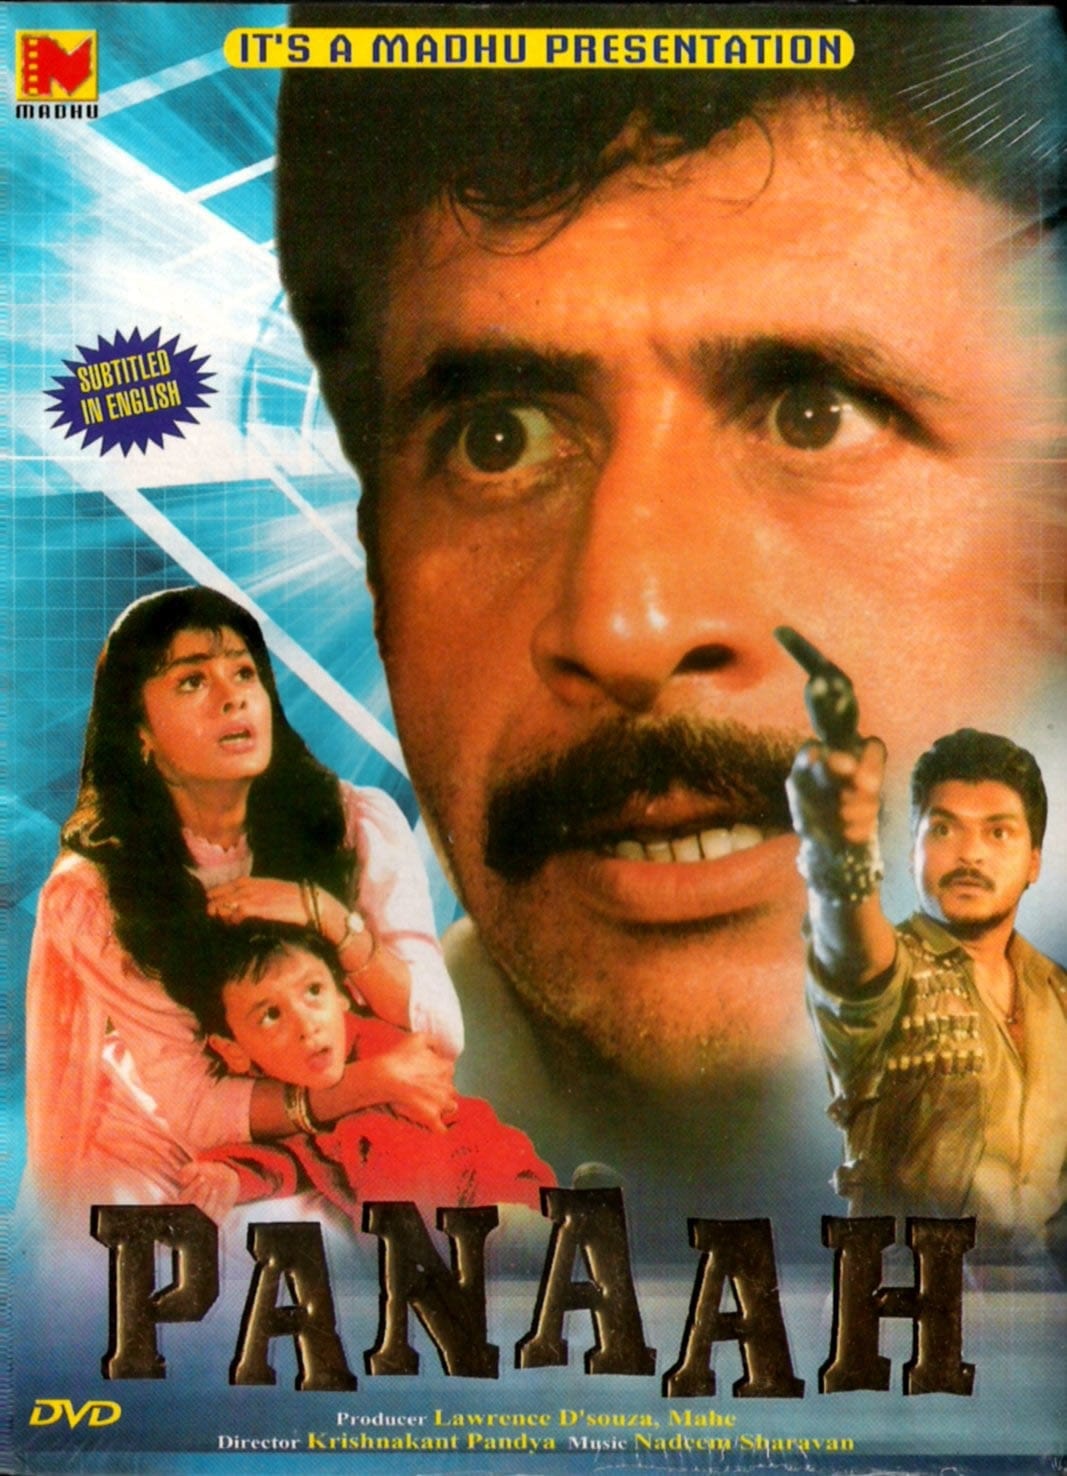 Poster for the movie "Panaah"